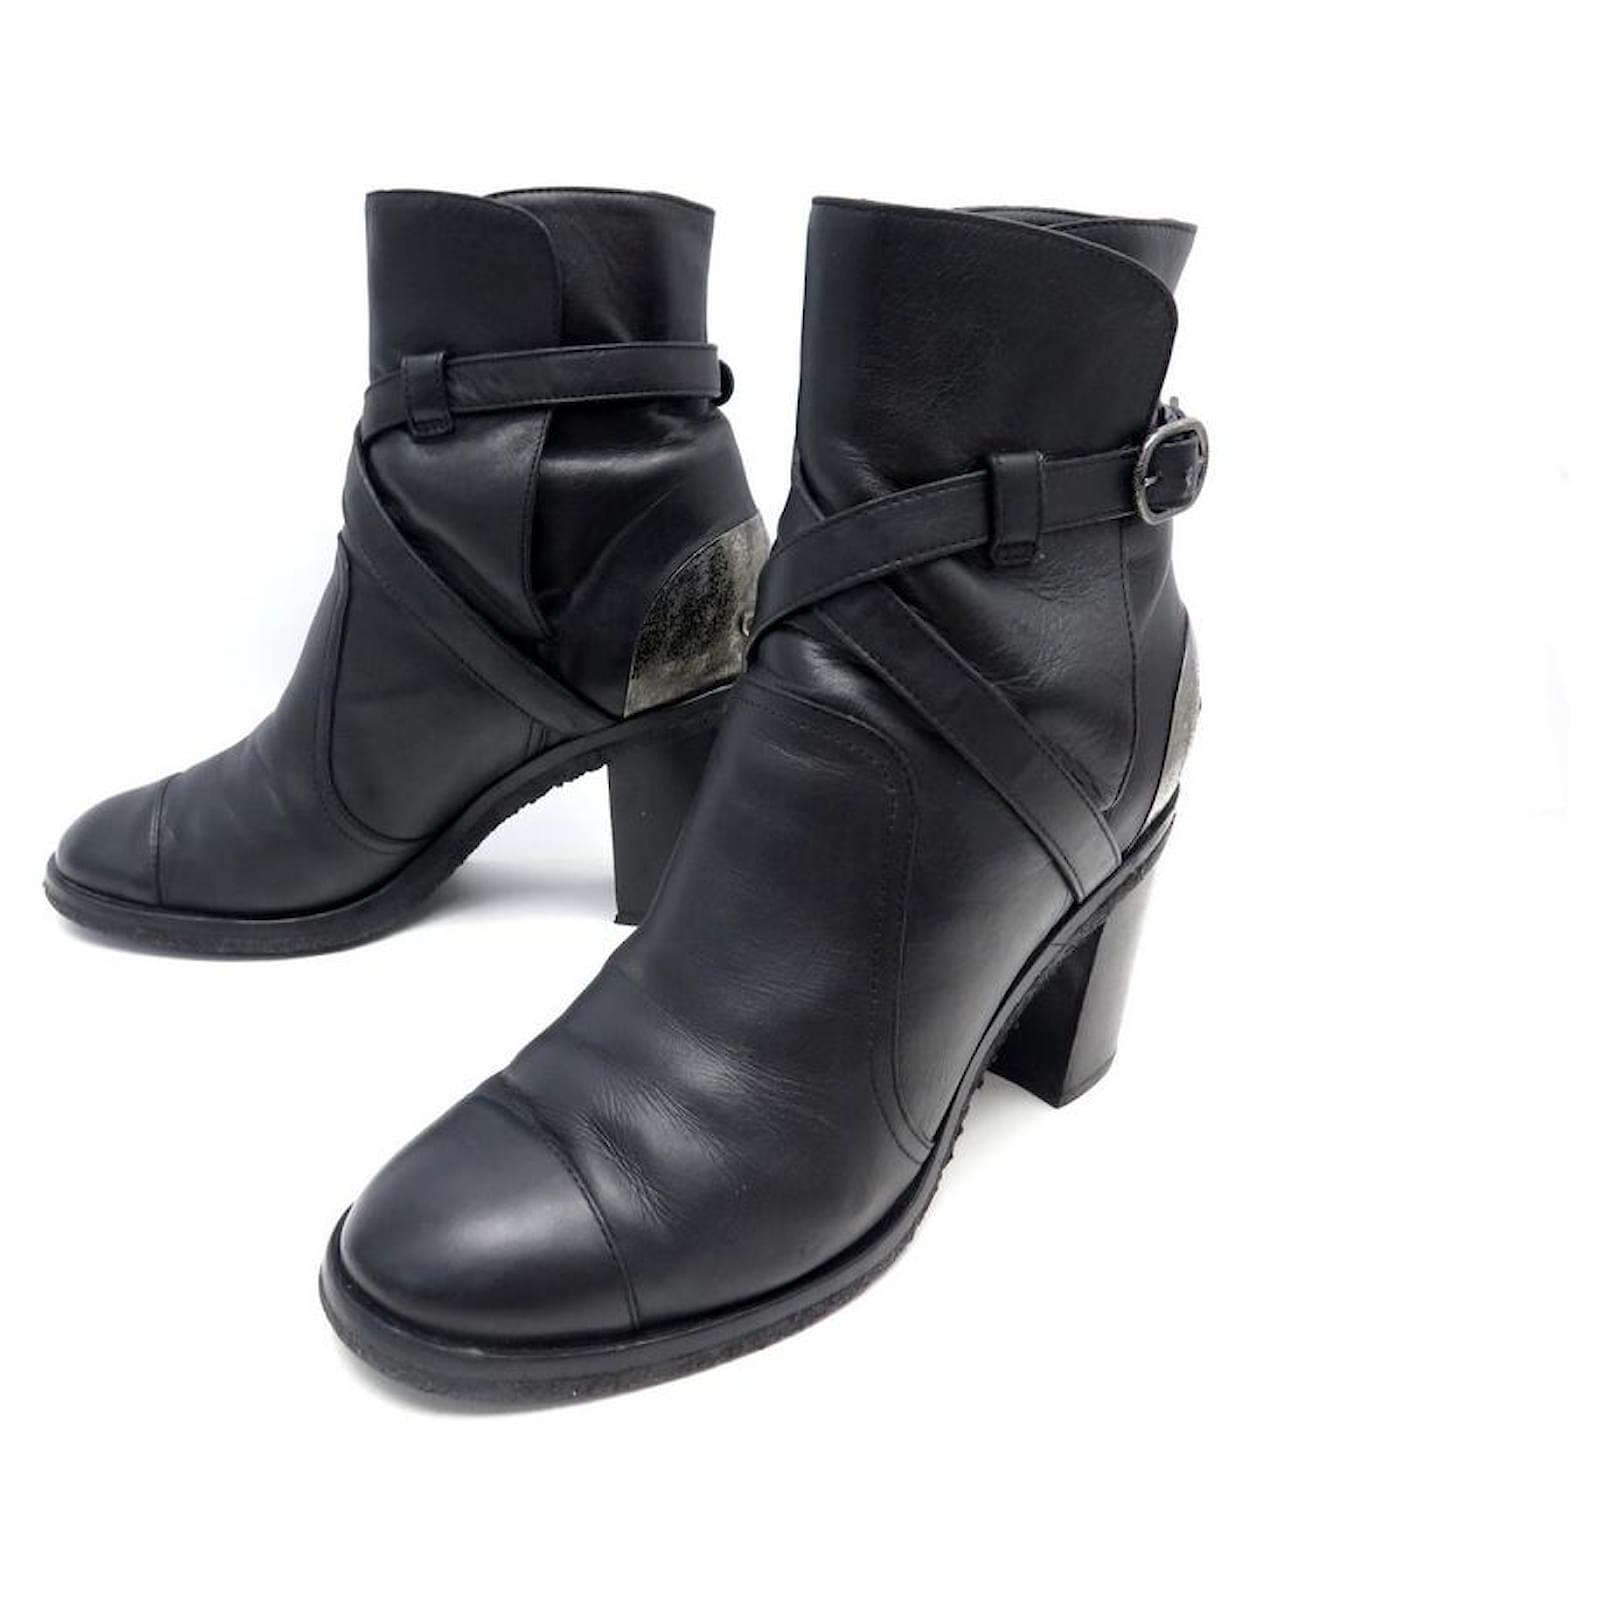 CHANEL SHOES BOOTS WITH G BUCKLE28593 Black Leather 39 LEATHER